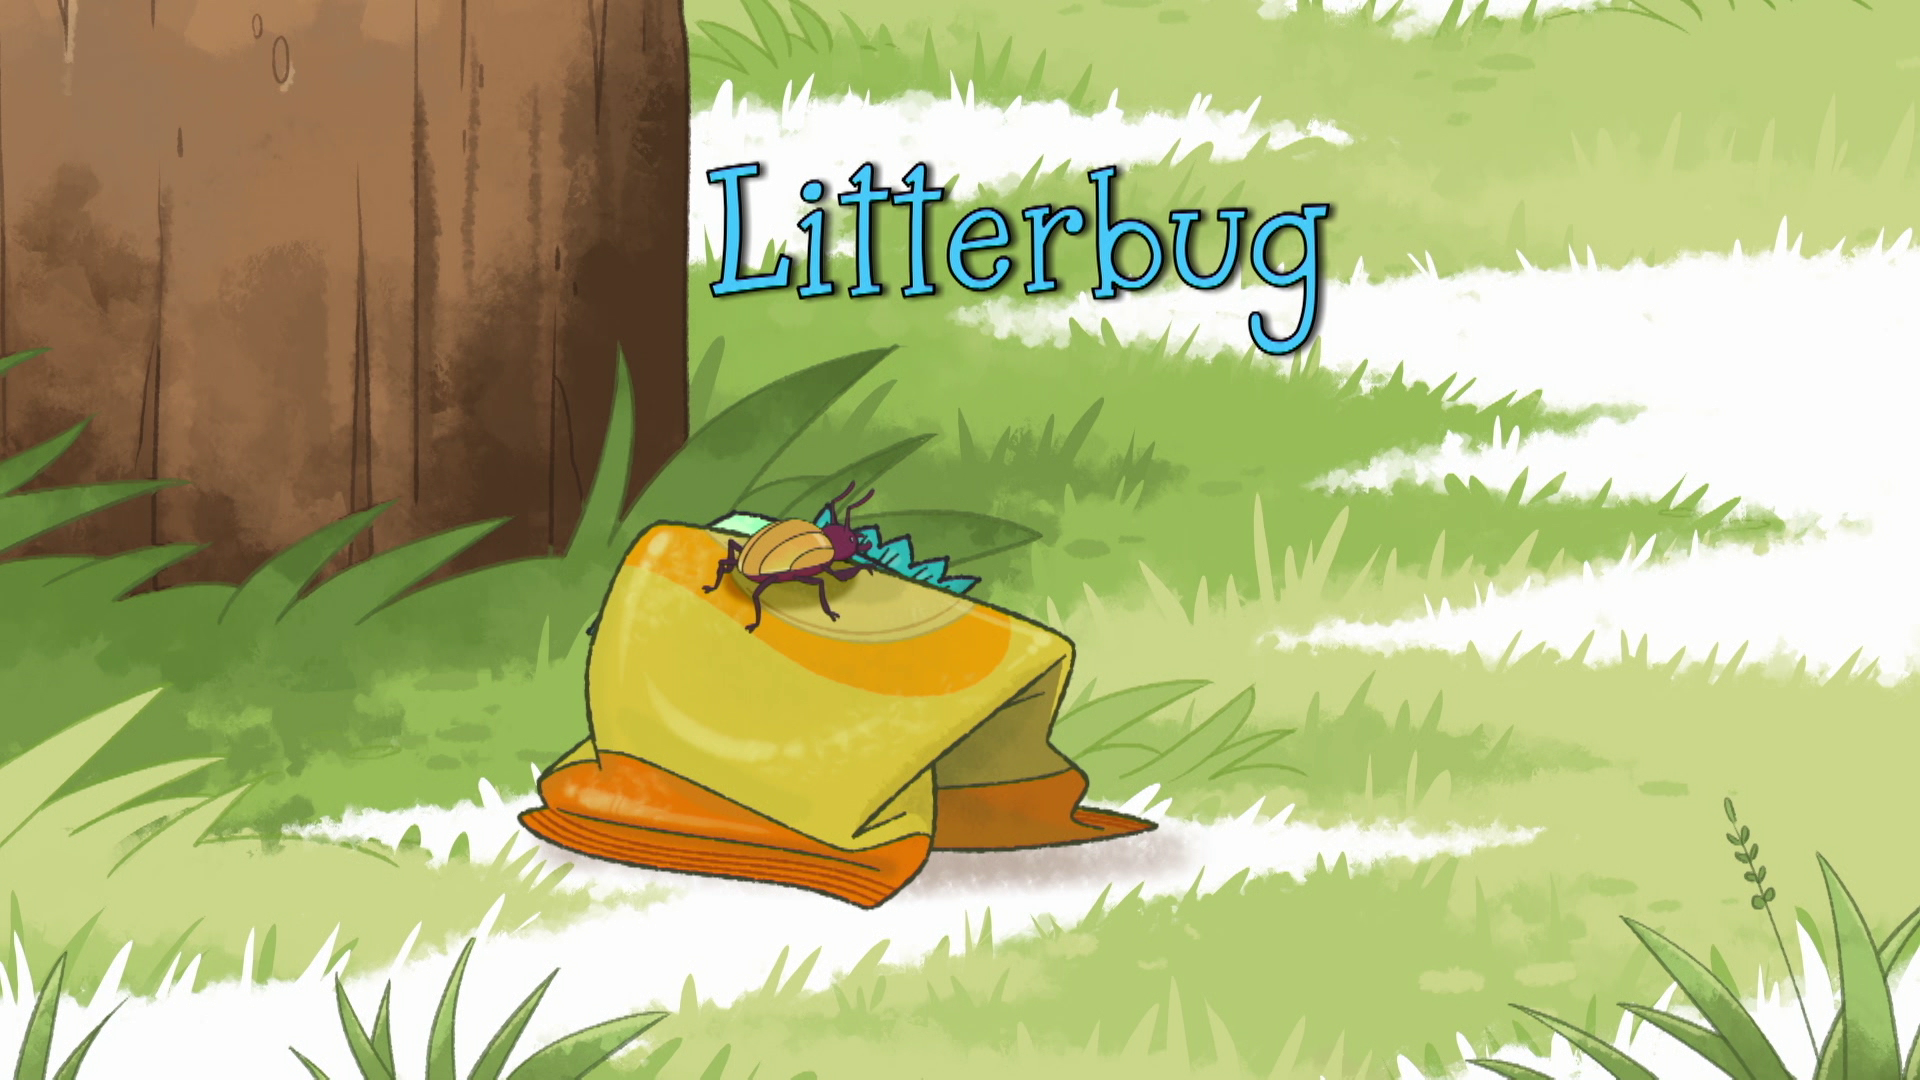 where does the term litterbug come from and what does litterbug mean